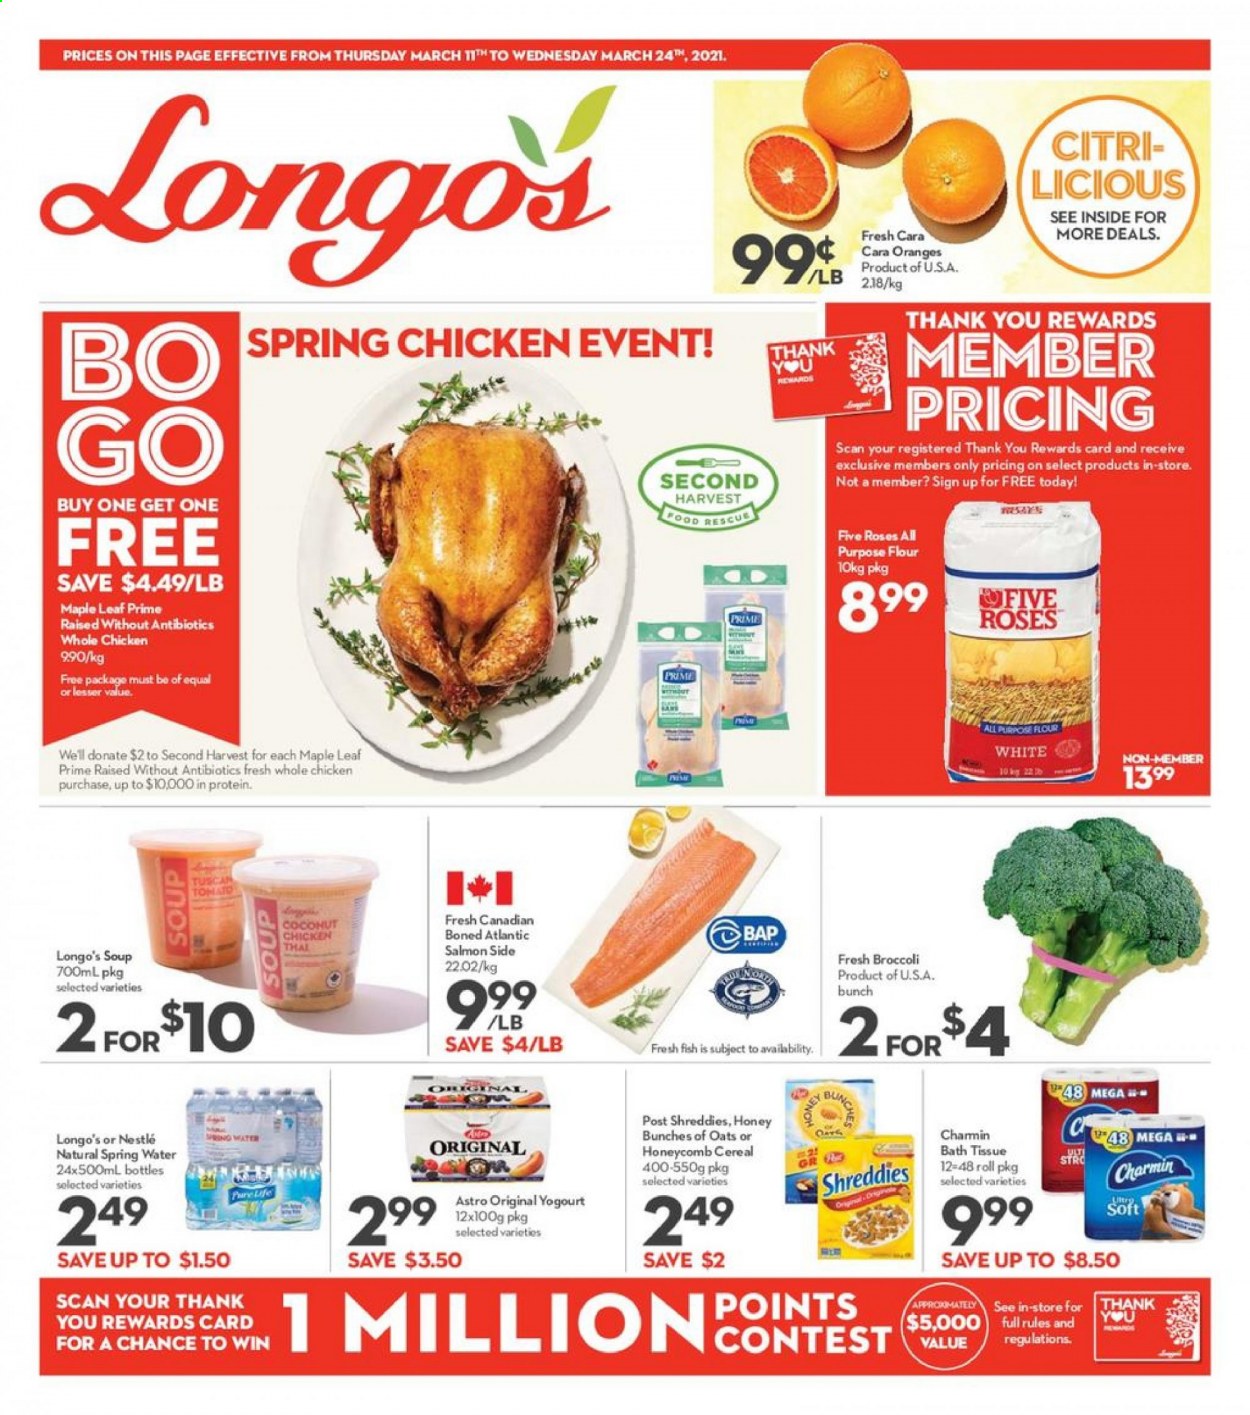 thumbnail - Longo's Flyer - March 11, 2021 - March 24, 2021 - Sales products - broccoli, salmon, fish, soup, all purpose flour, flour, cereals, spring water, whole chicken, chicken, bath tissue, Charmin, Nestlé. Page 1.